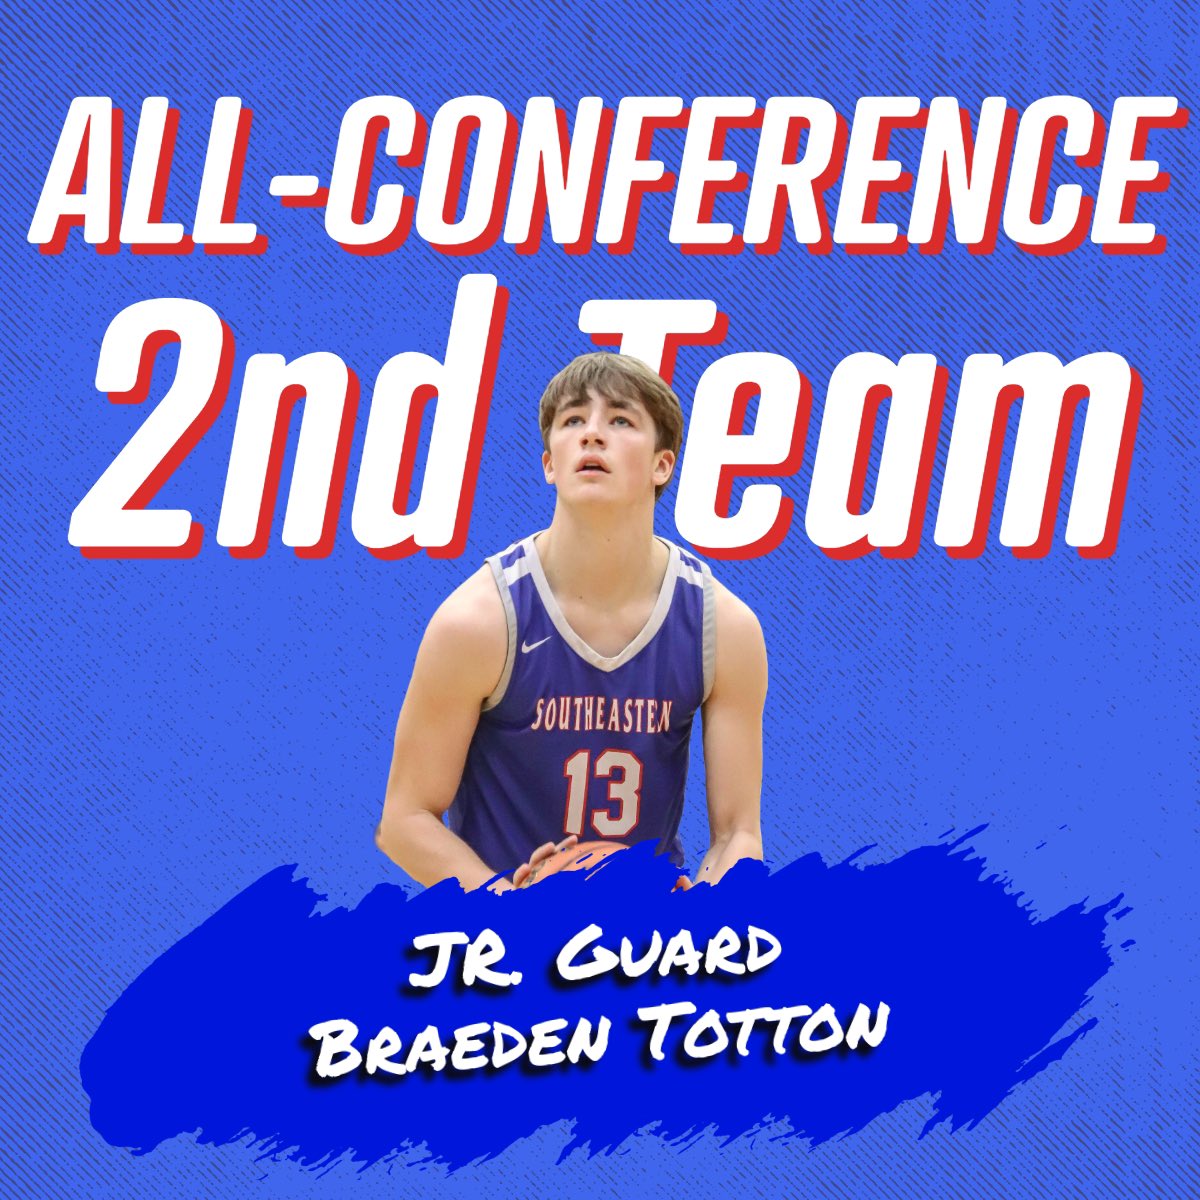 Congrats to Donovan Hamilton @donovannnnn2 and Braeden Totton @braeden33totton for making All-Conference in the @HoosierCConf Hoosier Crossroads Conference!